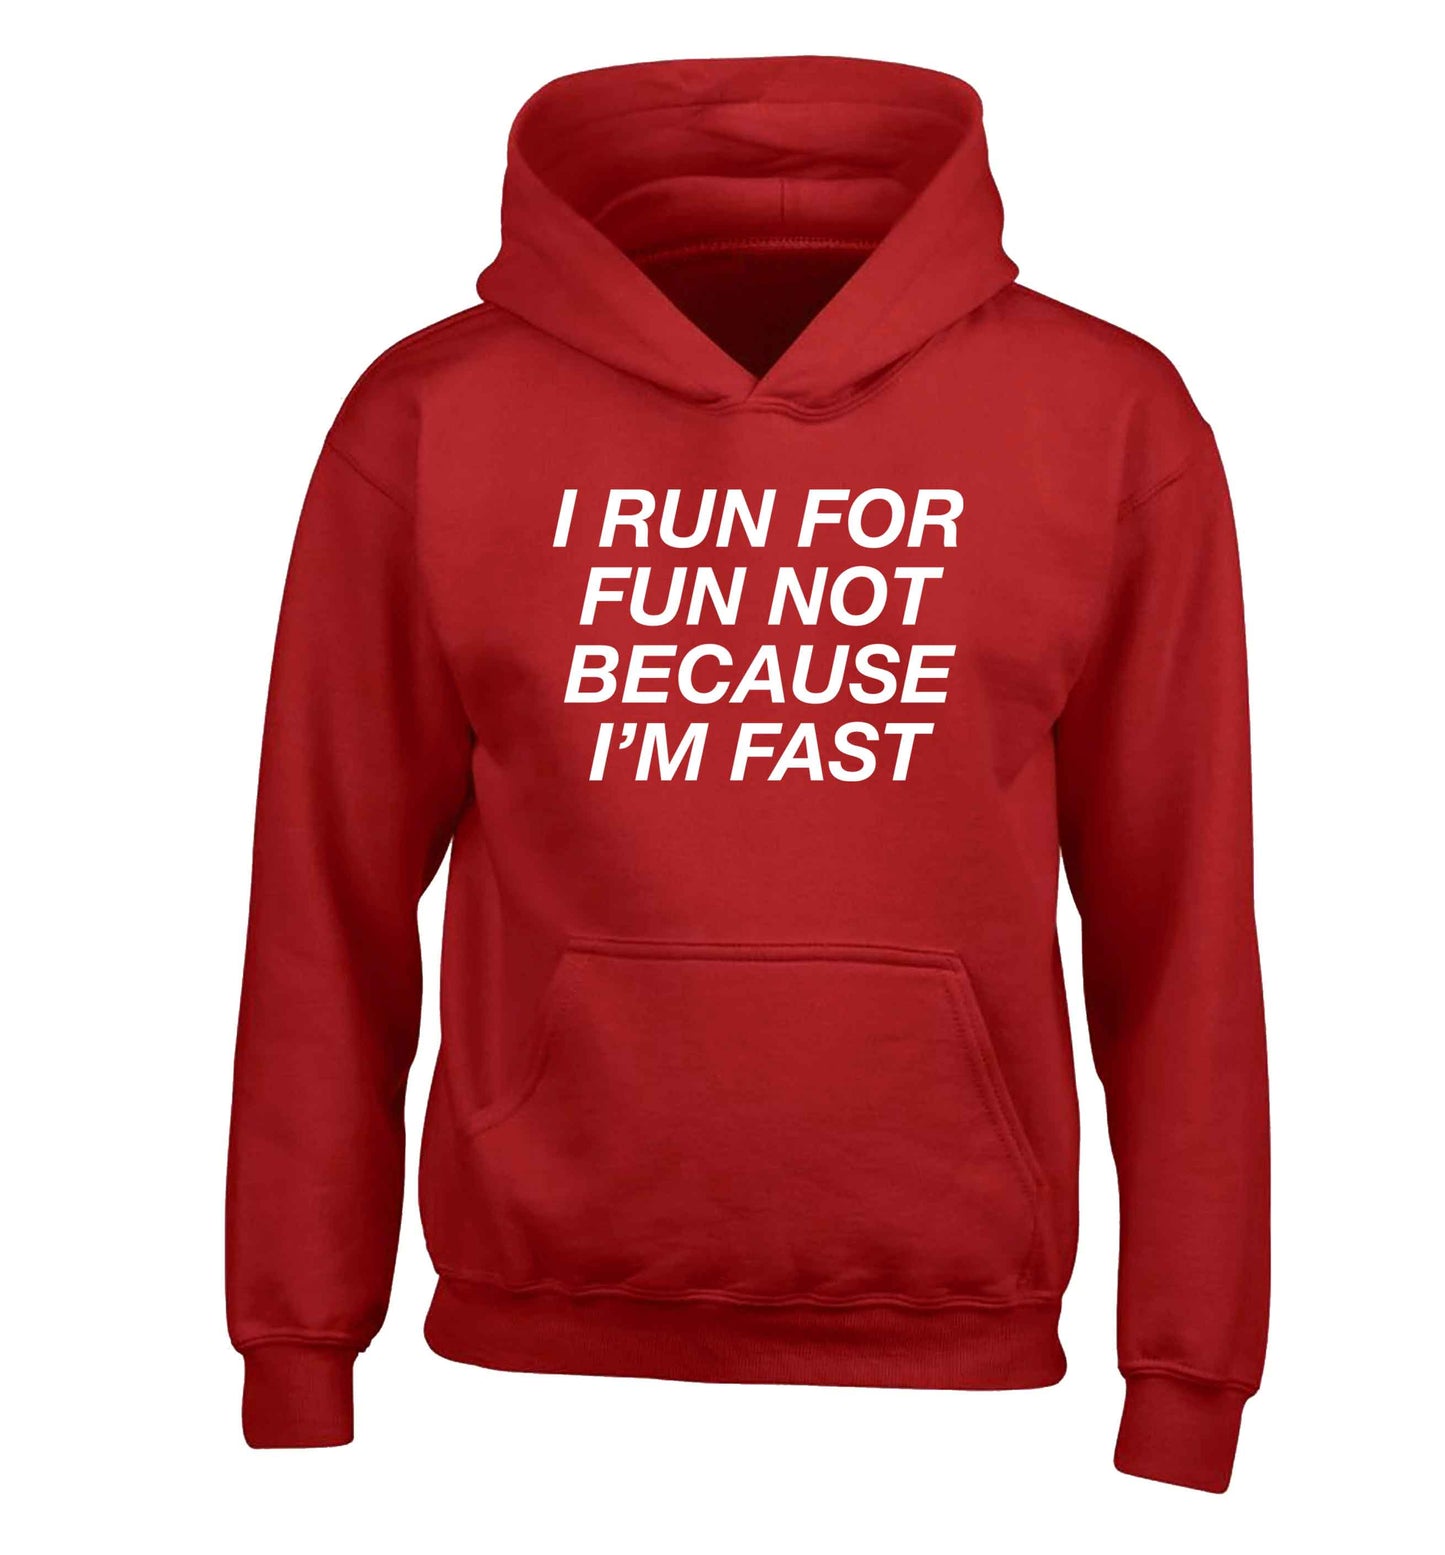 I run for fun not because I'm fast children's red hoodie 12-13 Years